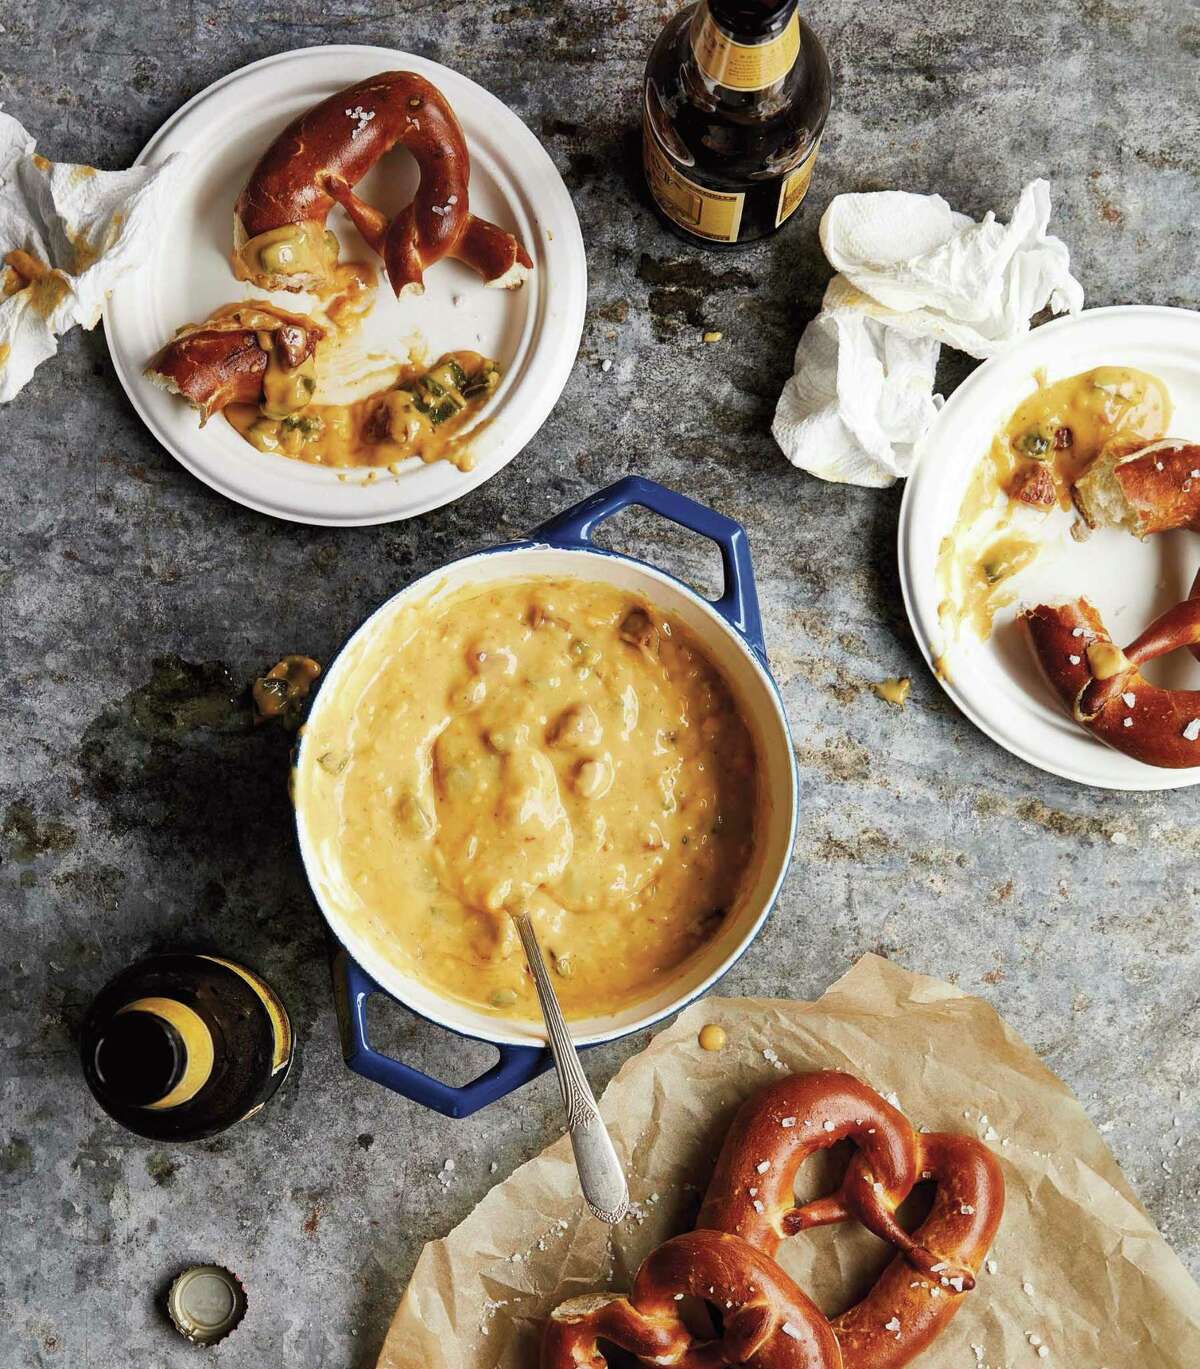 Hill Country Sausage Queso from "Queso! Regional Recipes for the World's Favorite Chile-Cheese Dip" by Lisa Fain.